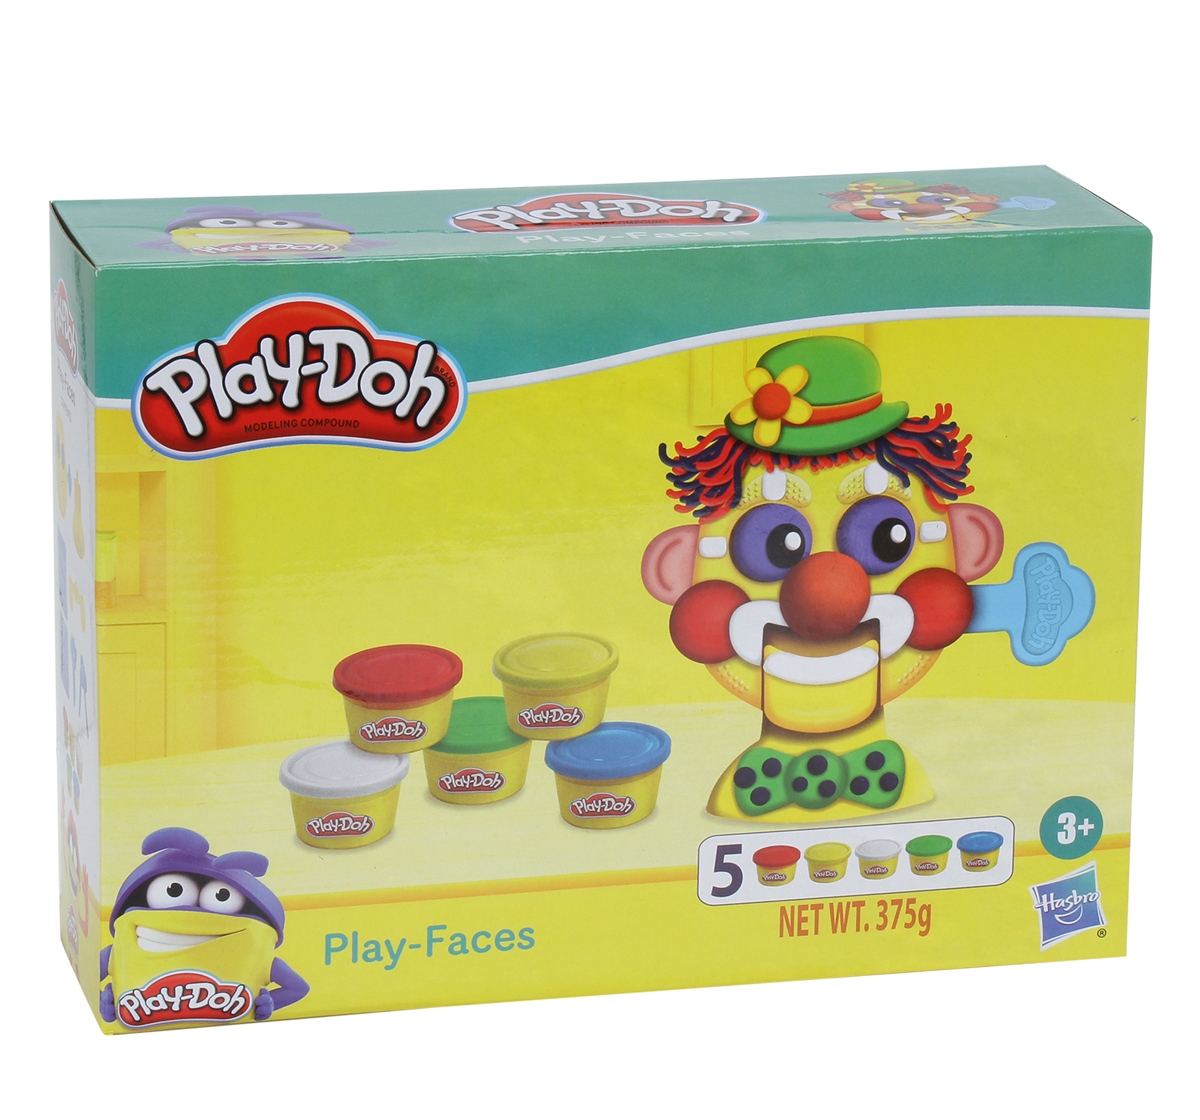 Play-Doh | Play Doh Play Faces Activity Toy for Kids 3Y+, Multicolour 3